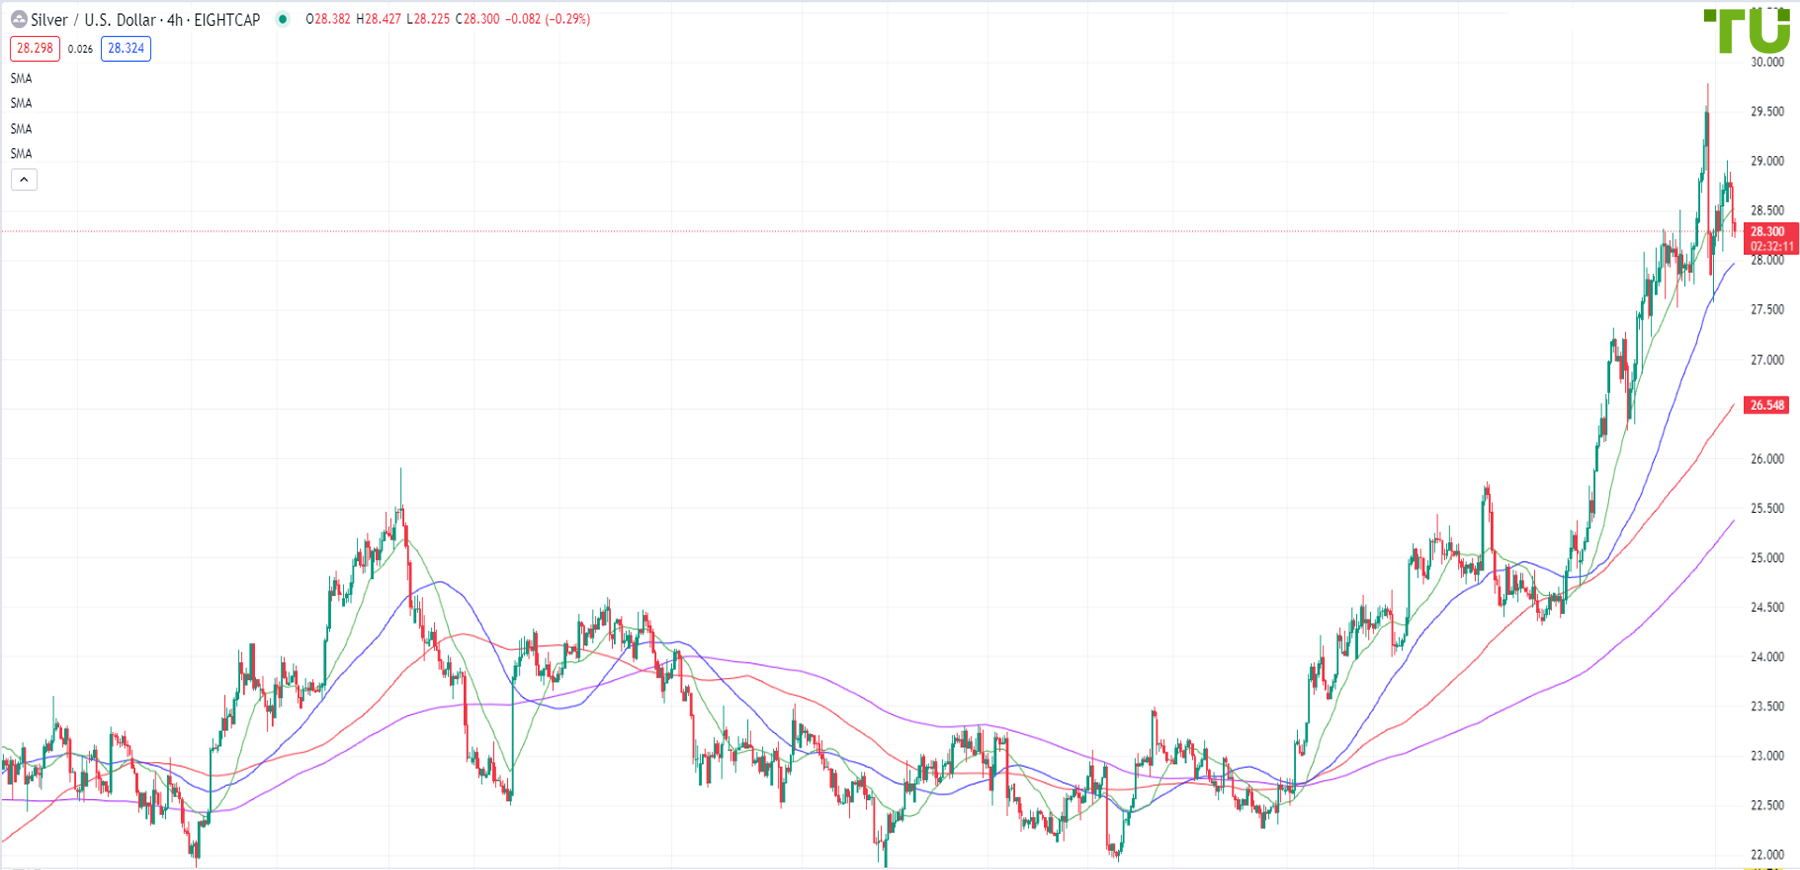 XAG/USD is under pressure after the growth attempt